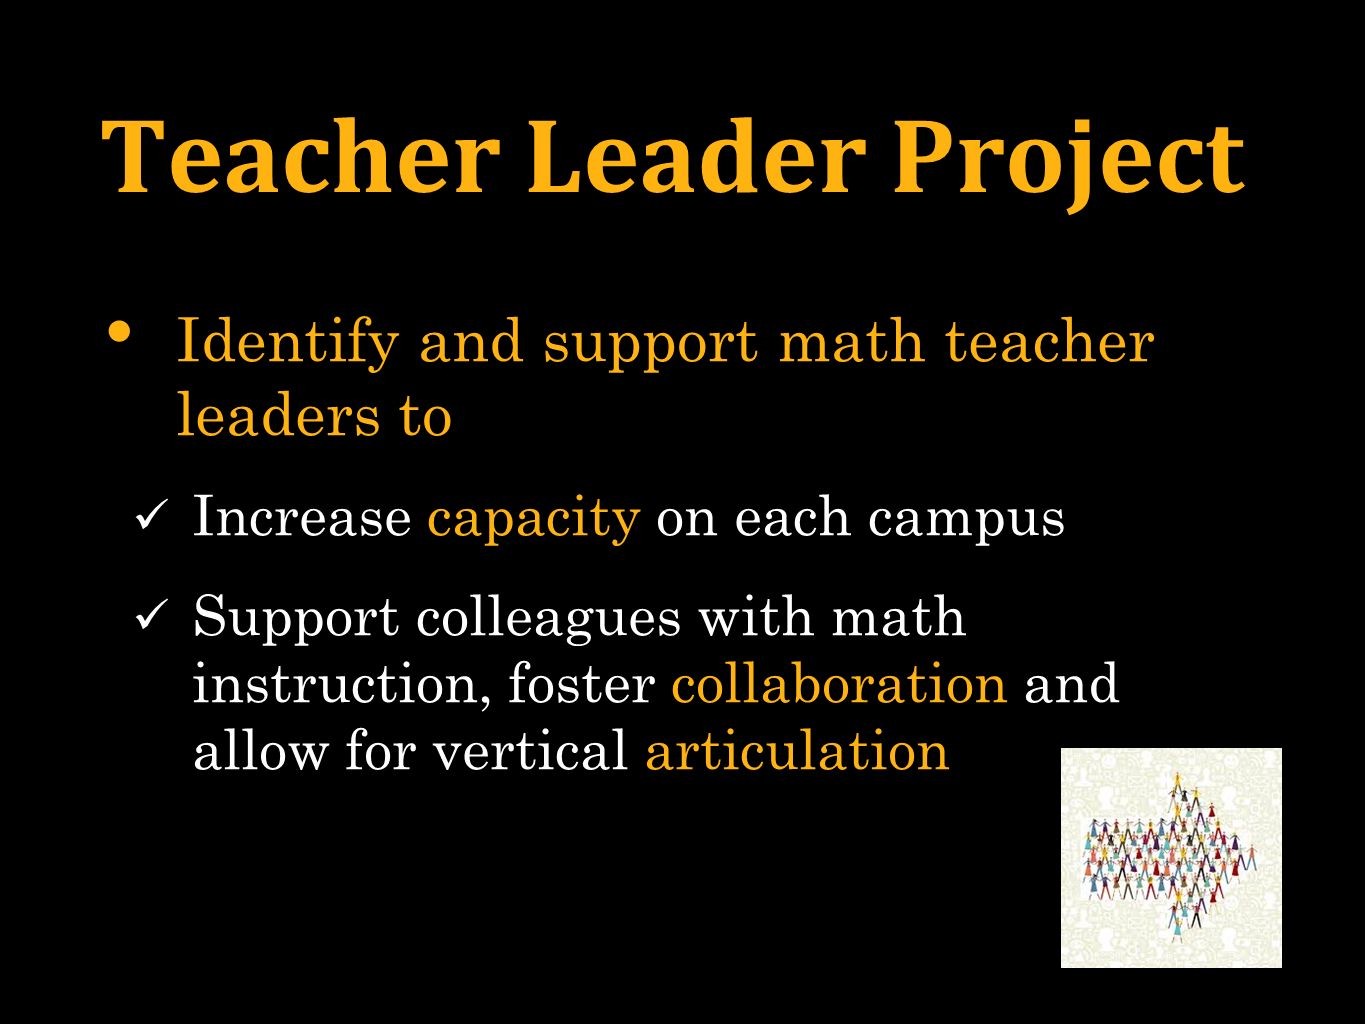 Teacher Leader Project Identify and support math teacher leaders to Increase capacity on each campus Support colleagues with math instruction, foster collaboration and allow for vertical articulation